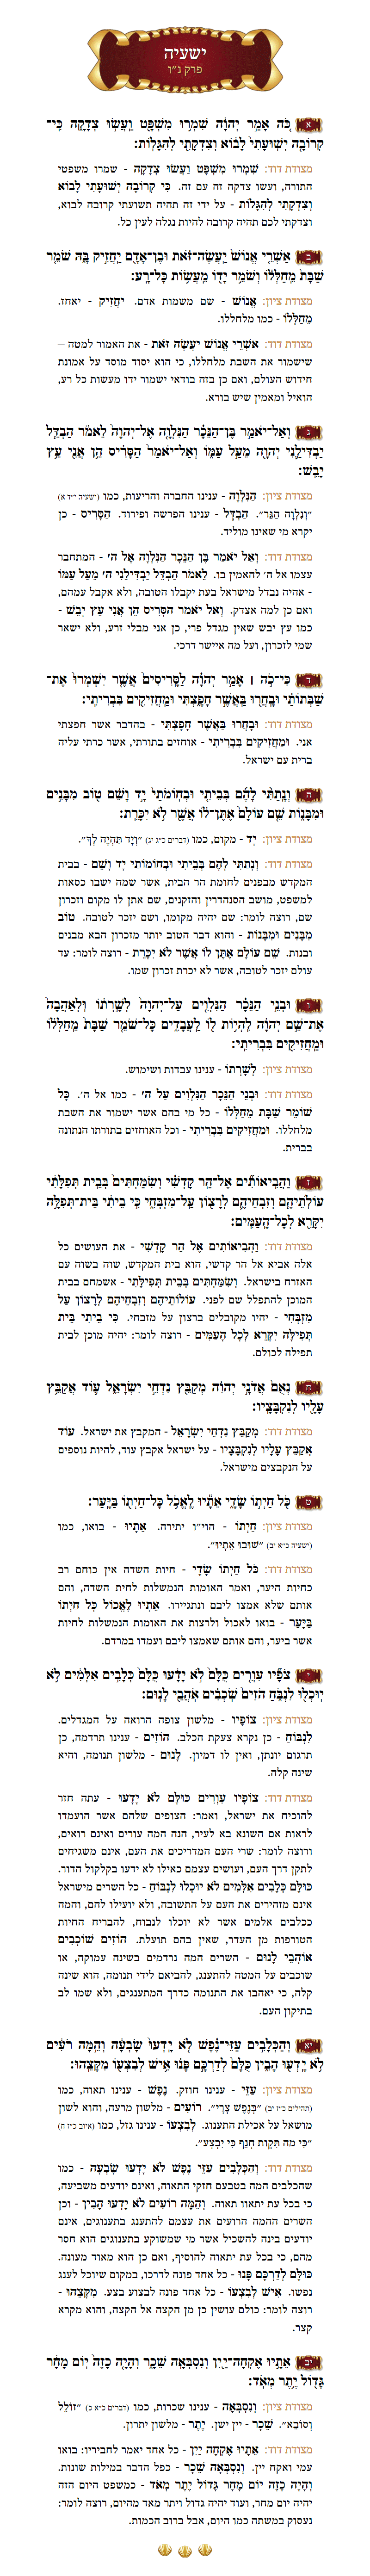 Sefer Yeshayohu Chapter 56 with commentary